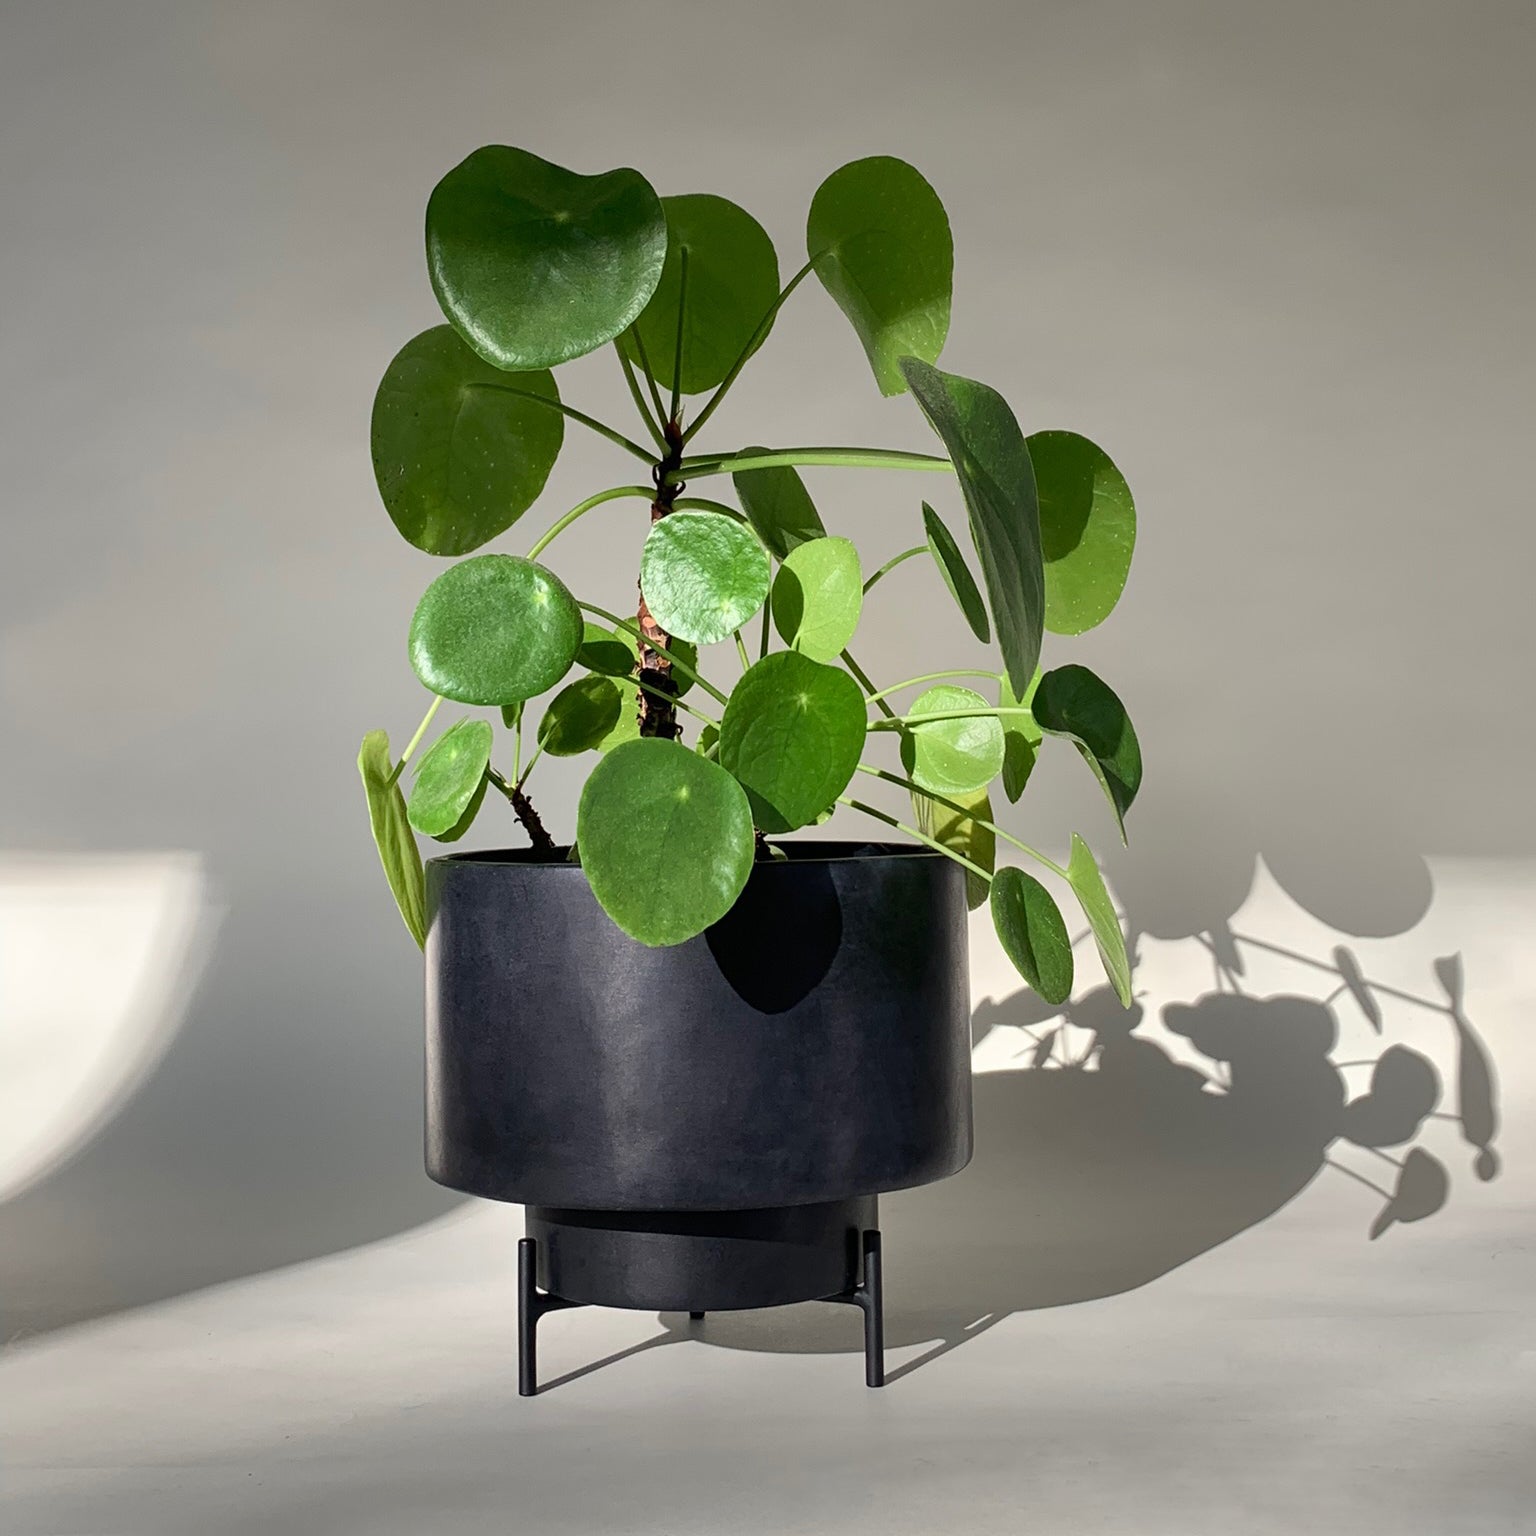 Image of M+A NYC Planter/Vase Set in Soapstone being used as a planter potted with a Pilea plant 